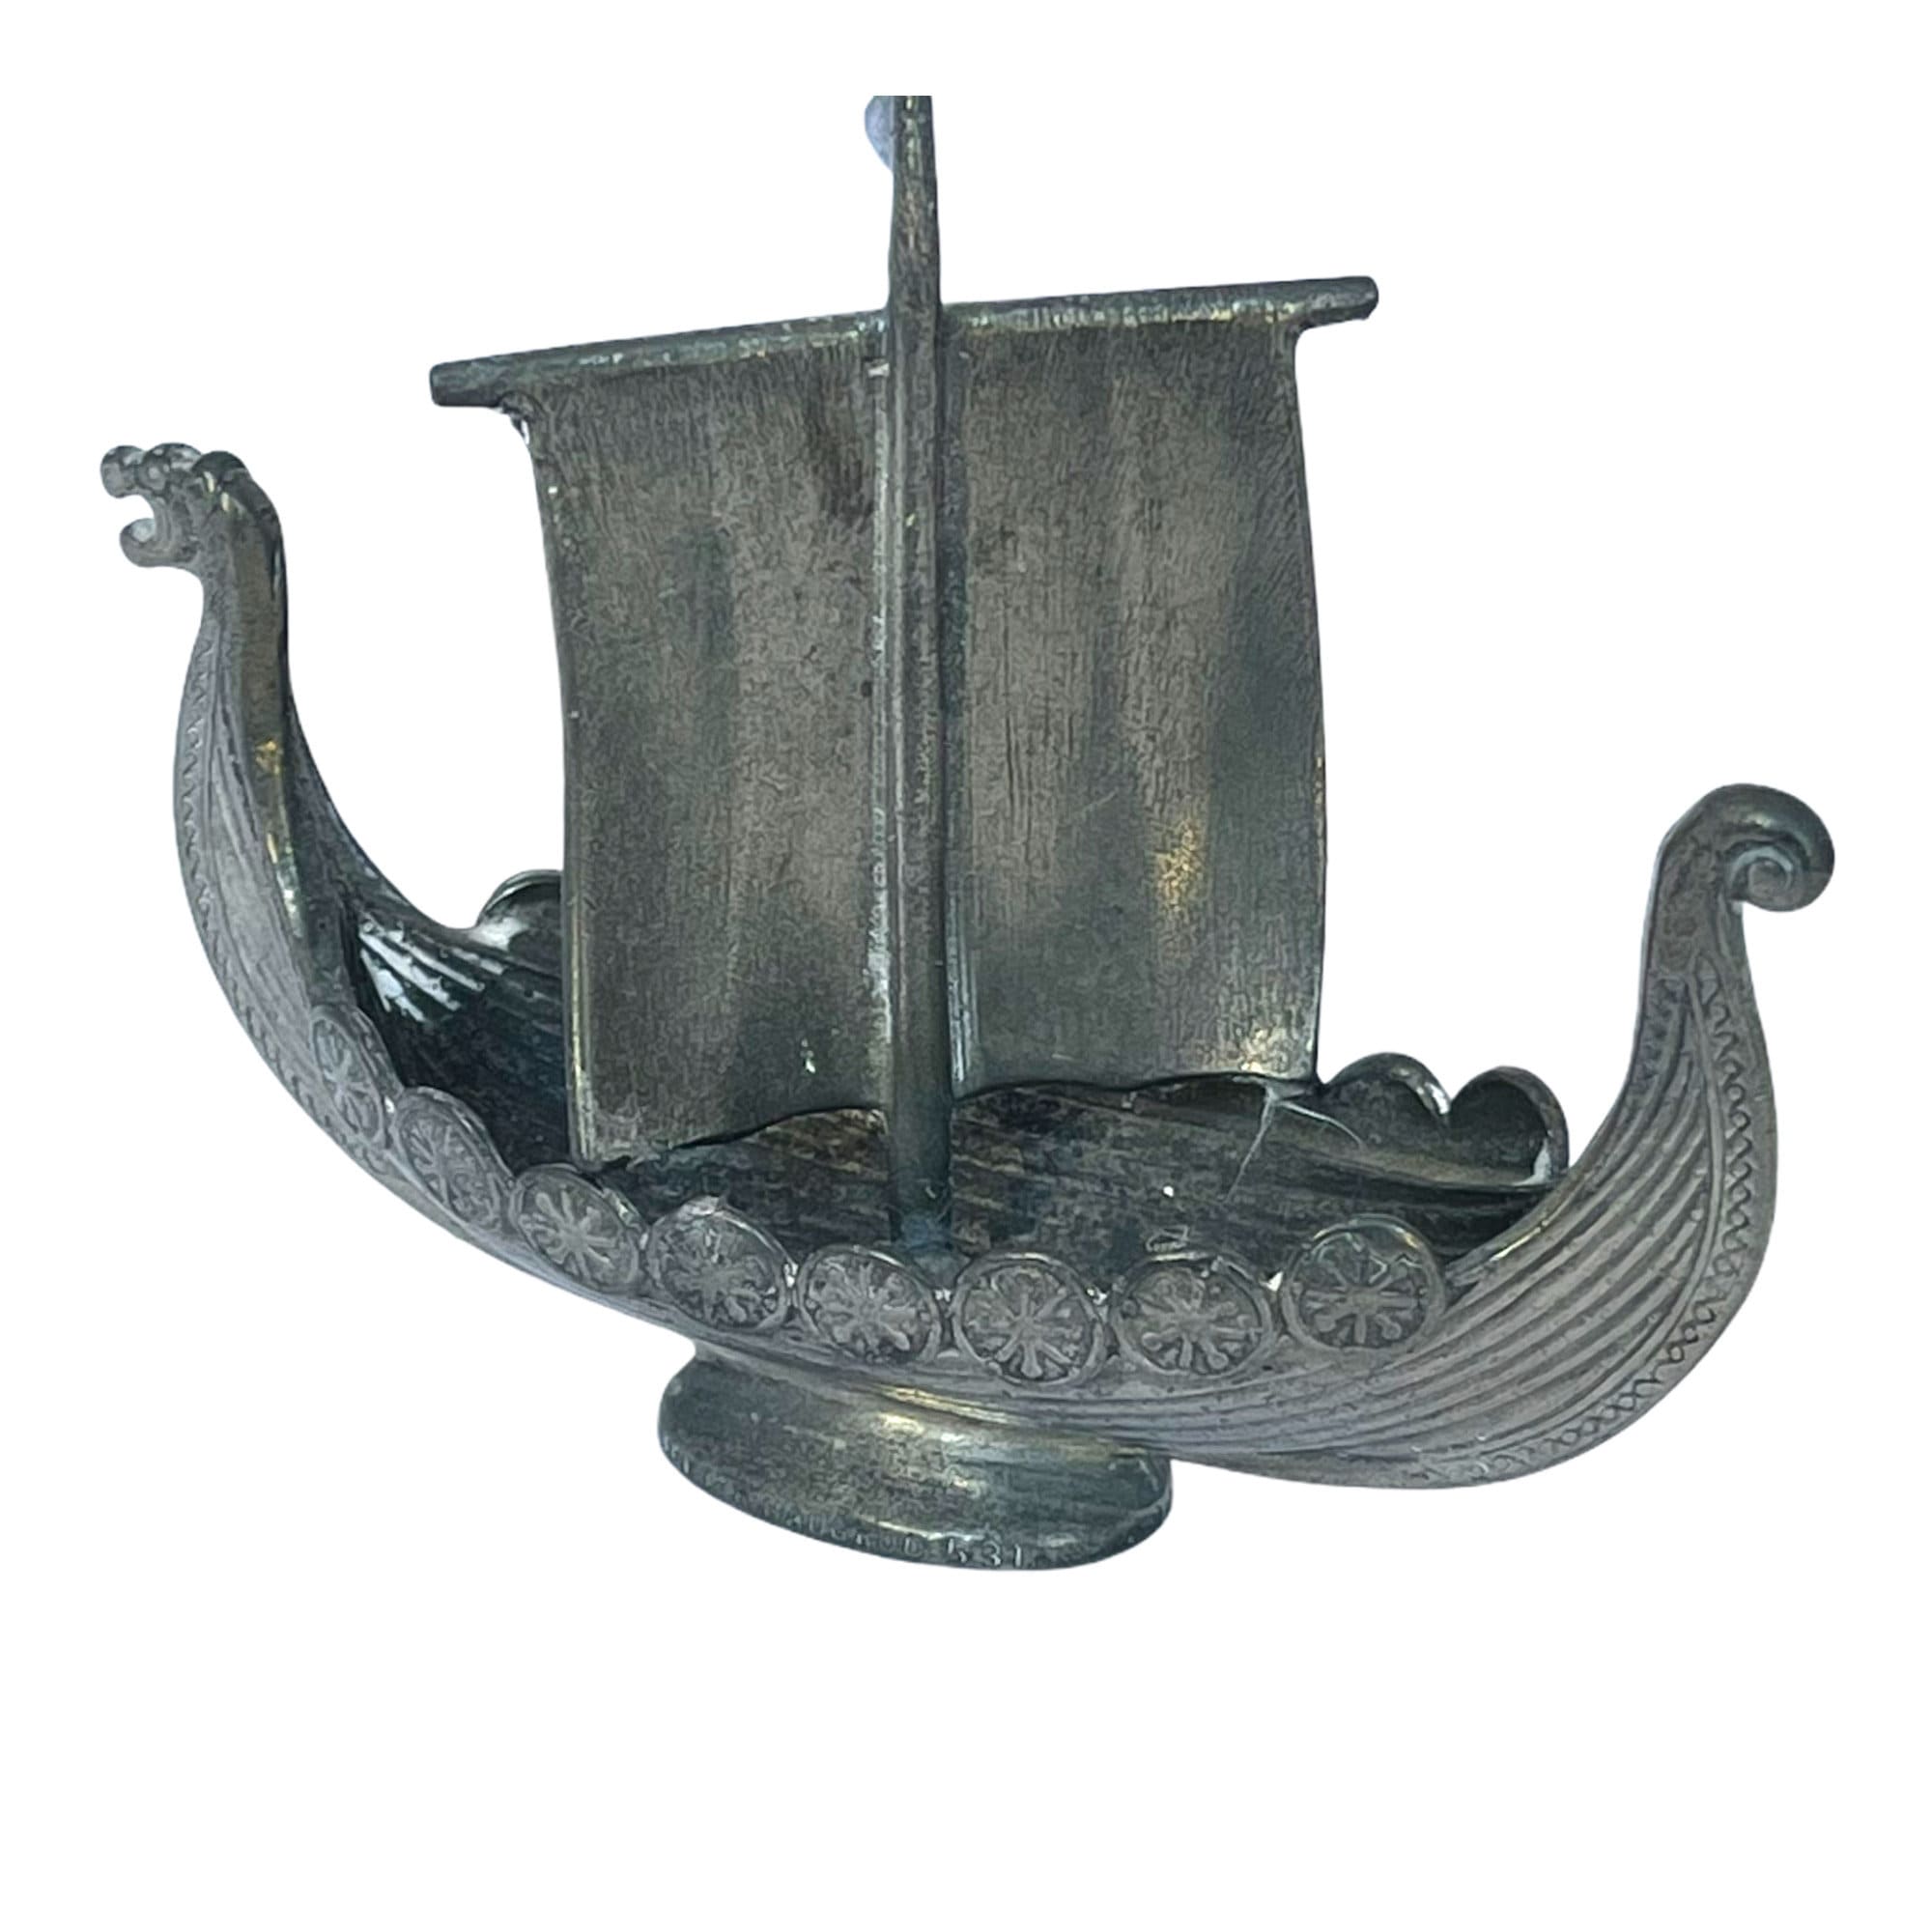 NEW Norway Viking Ship Pewter Ornament 